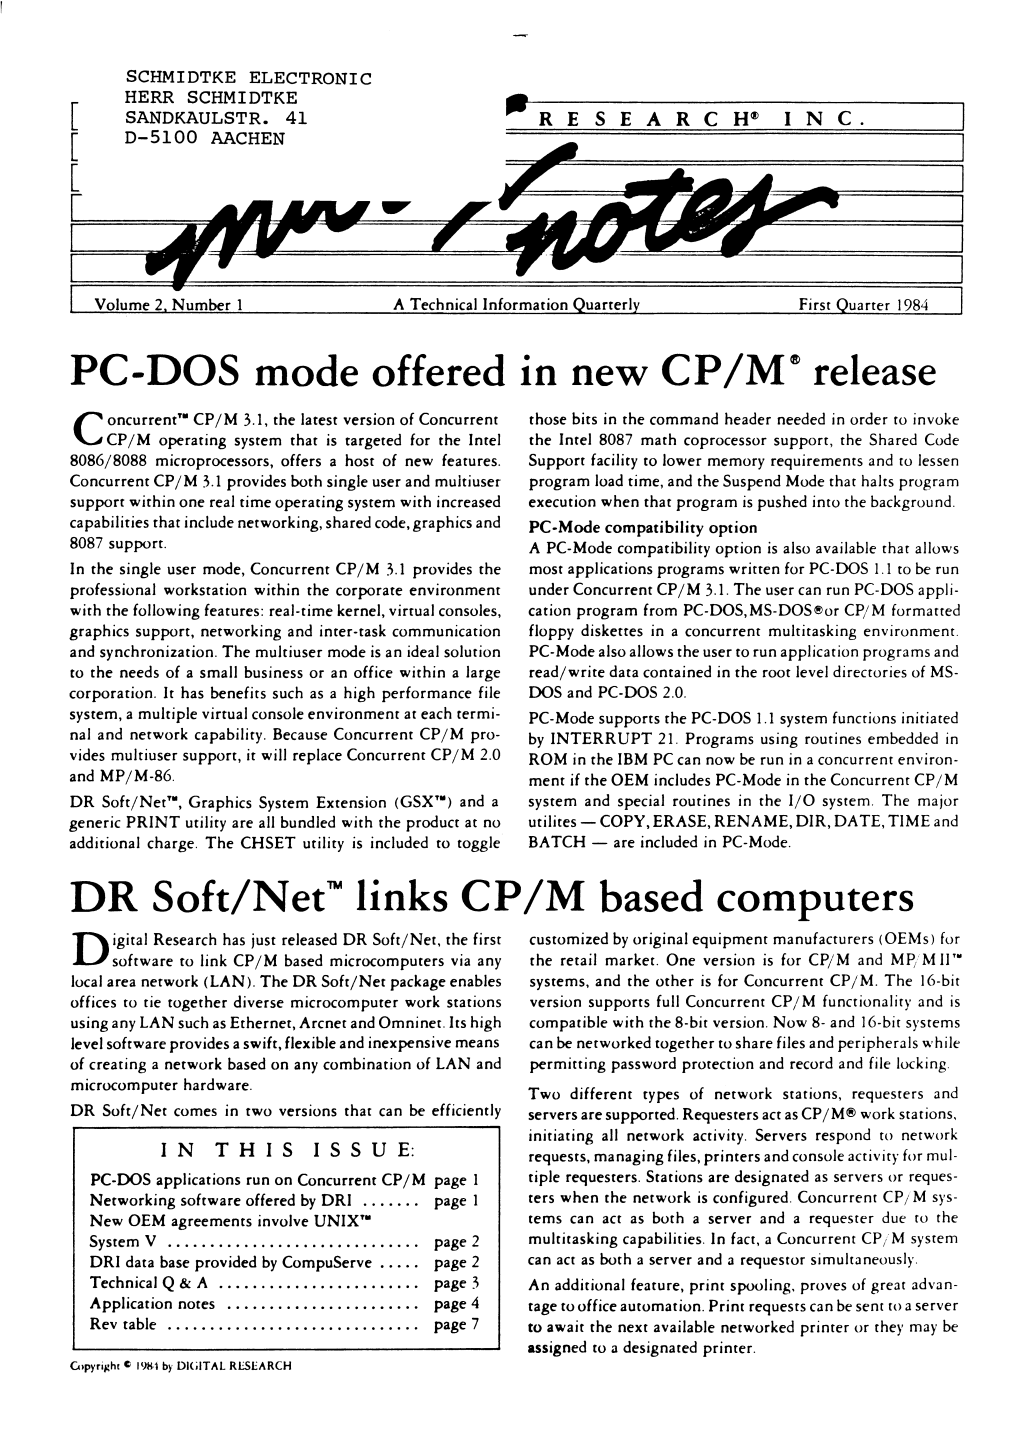 PC-DOS Mode Offered in New CP/M * Release DR Soft/Net” Links CP/M